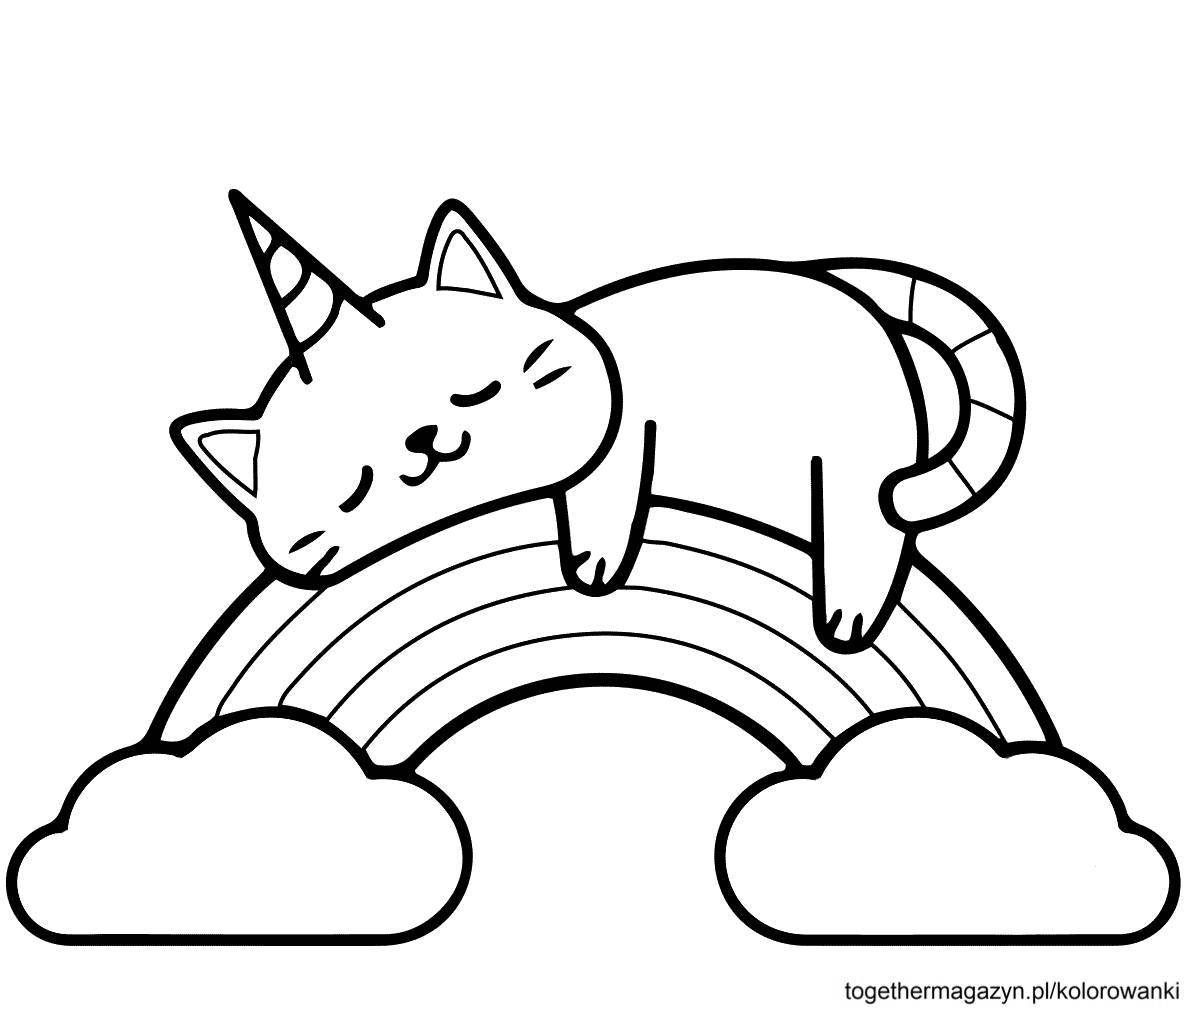 Coloring page charming long cat